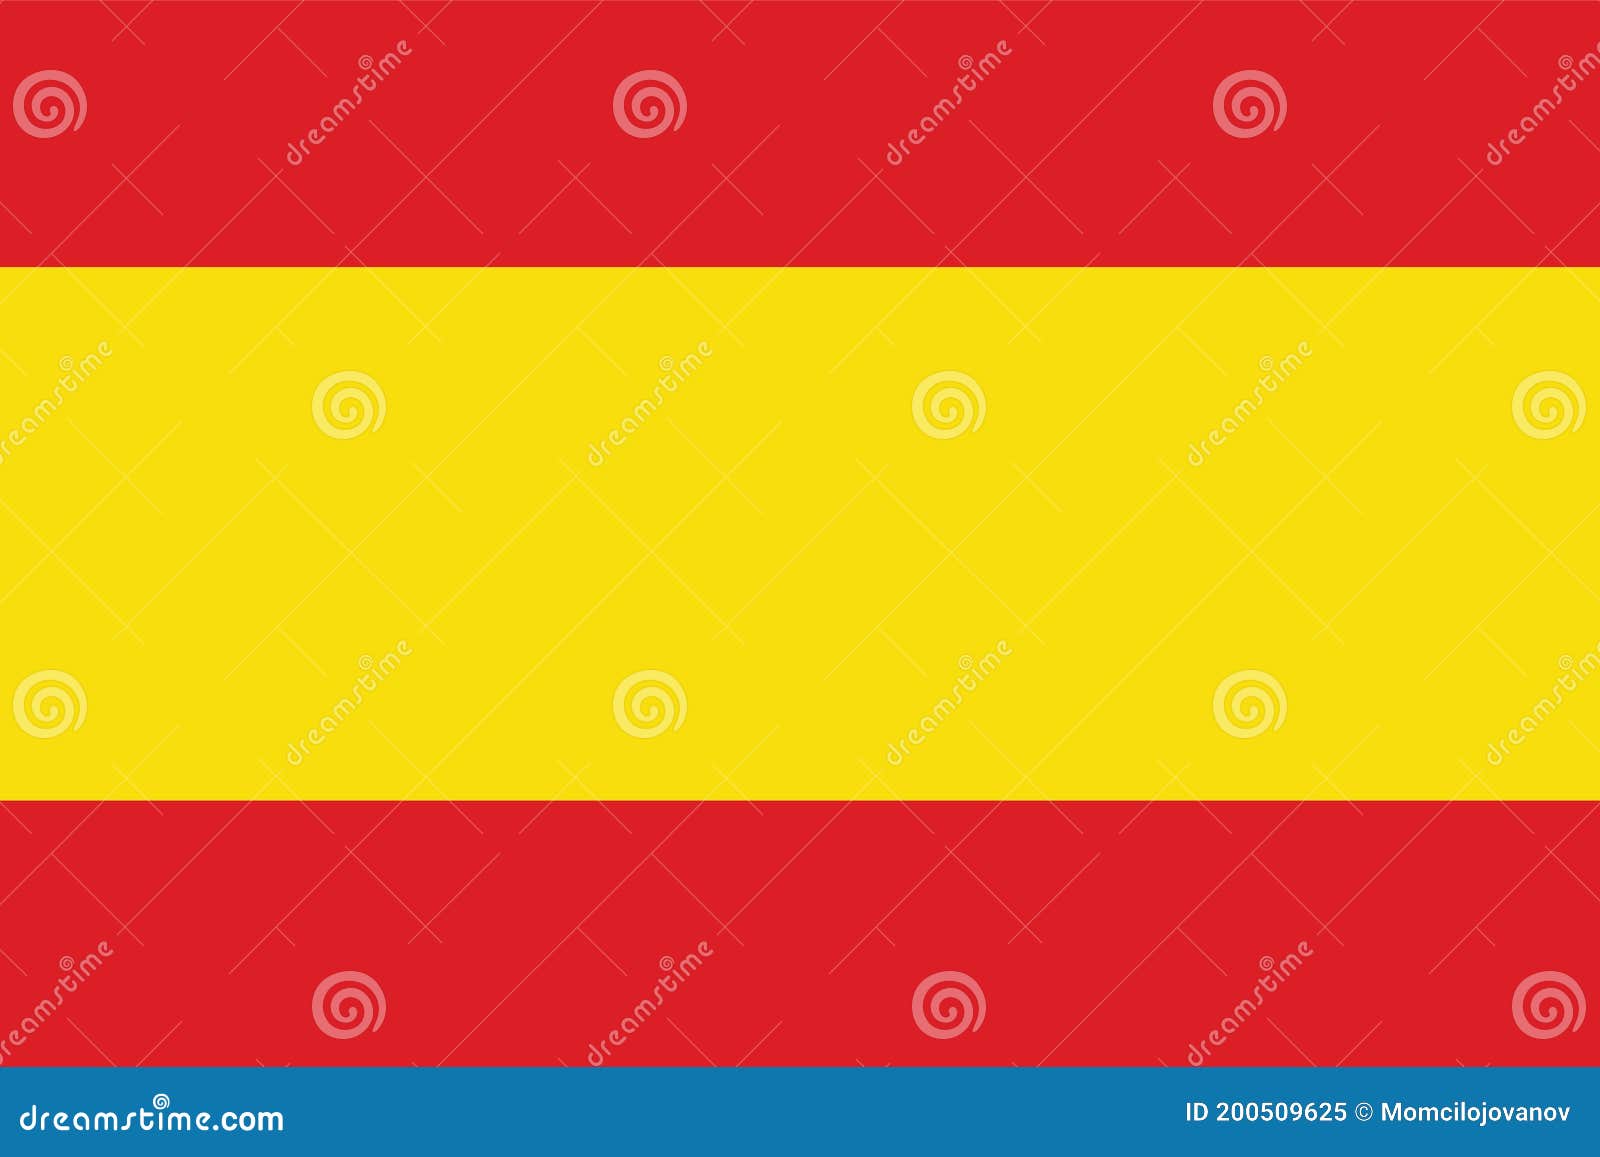 civil flag of the francoist spain from 1936 to 1938